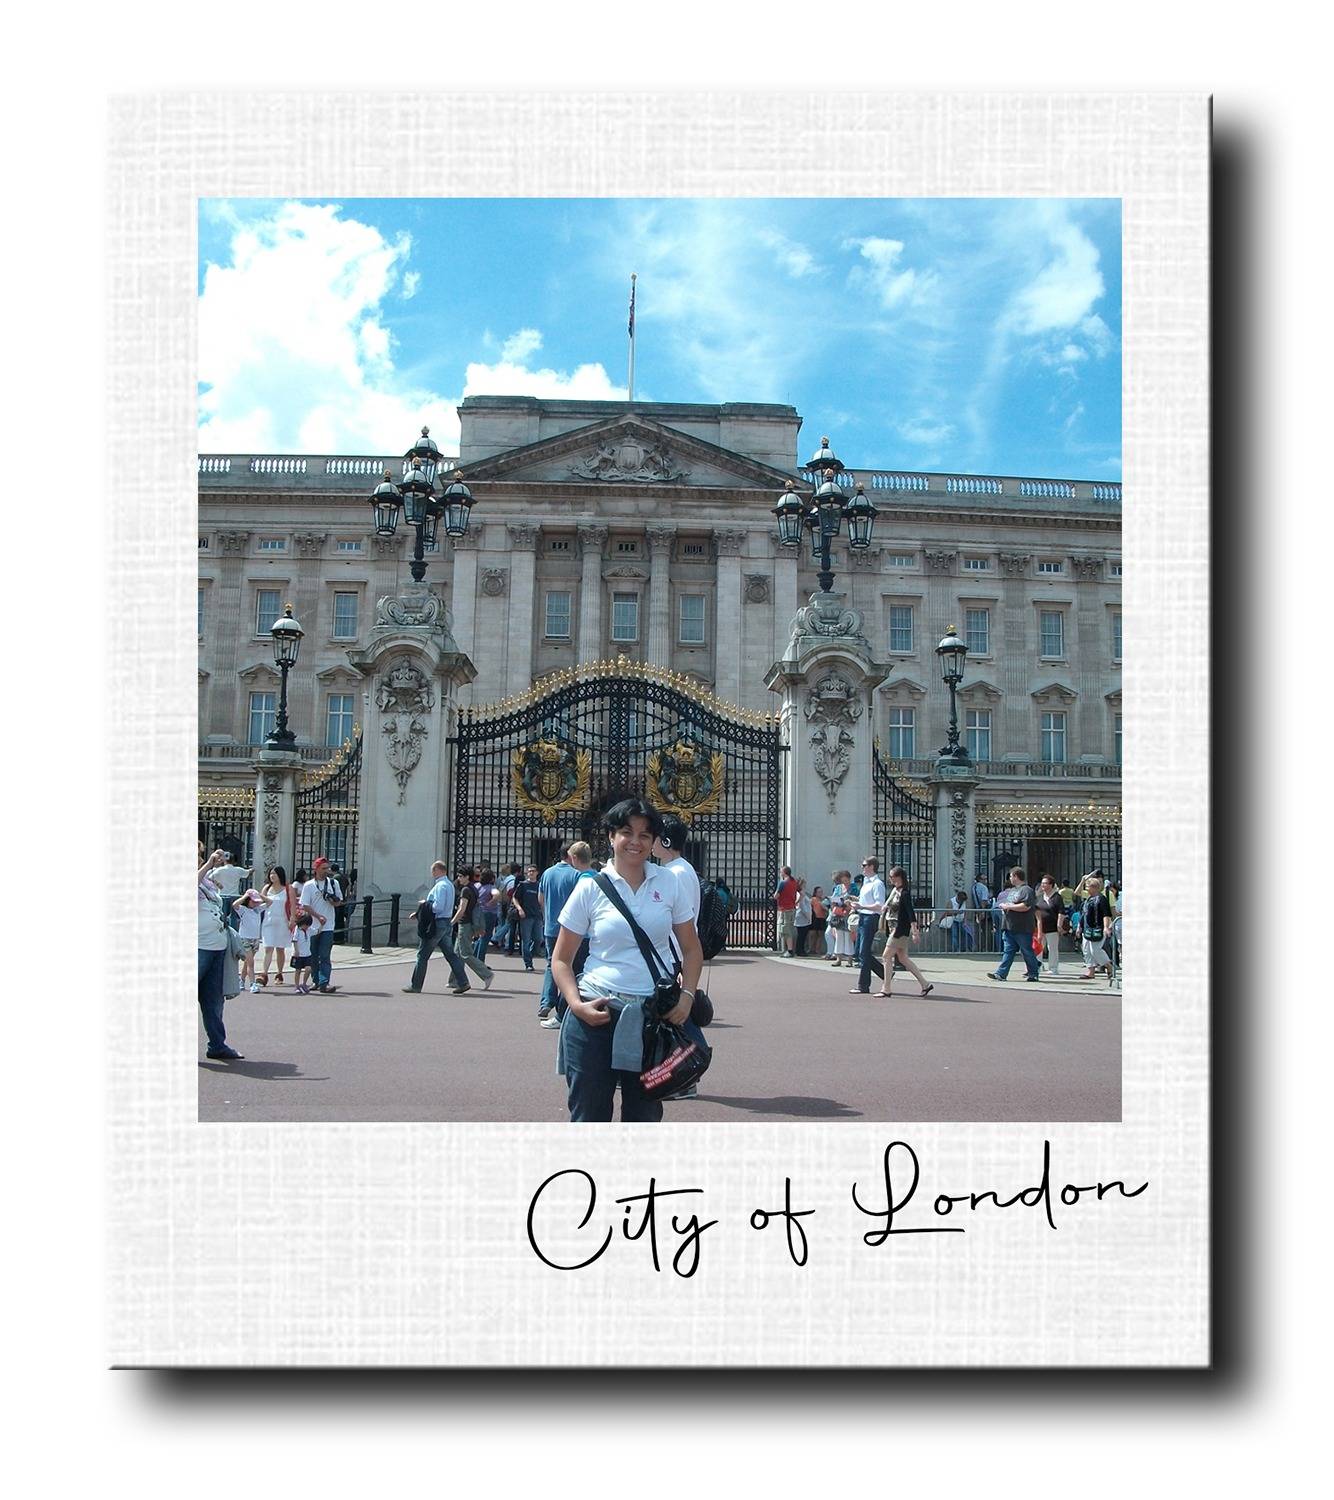 Third Day in London, City of Royalty